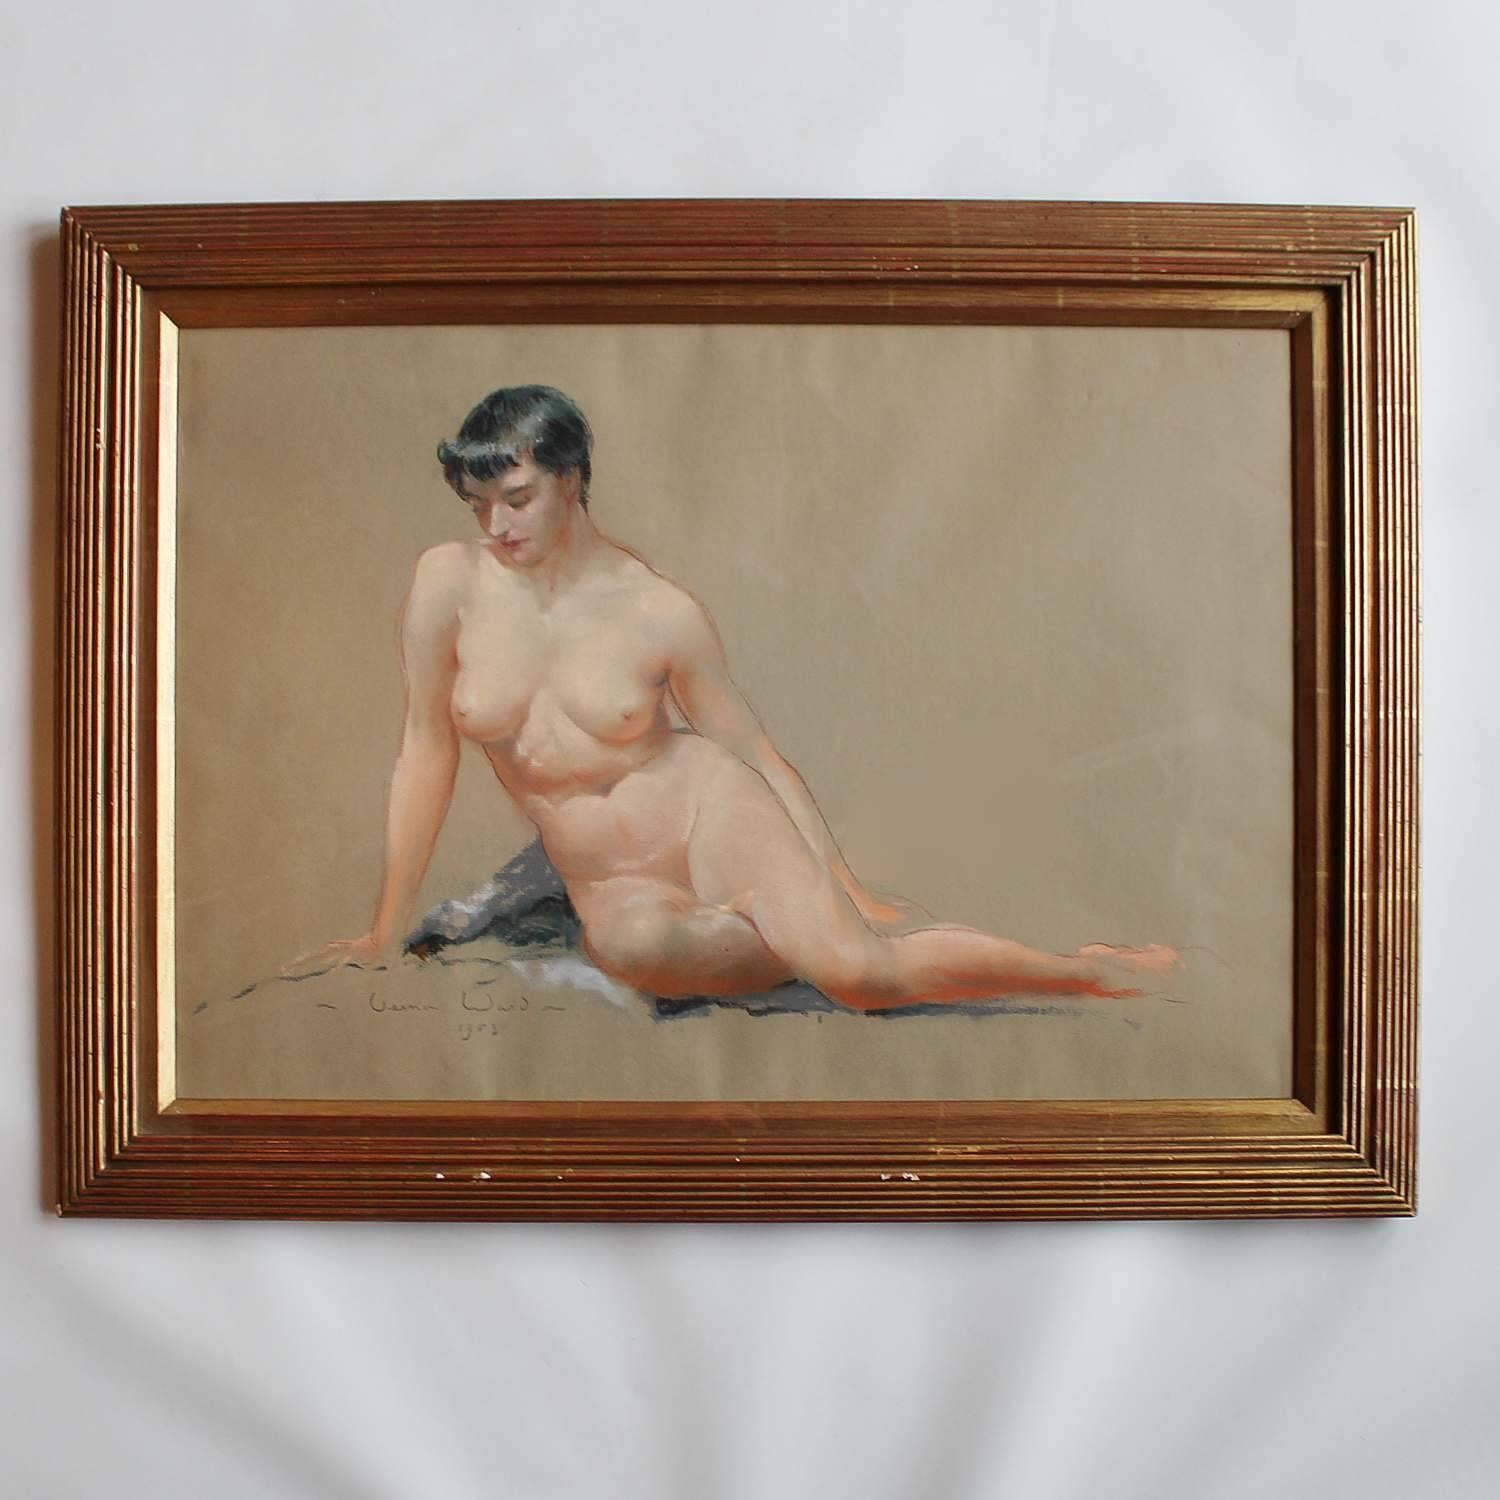 A study in pastels on paper of a nude figure. Signed and dated lower left.

Vernon Beauvoir Ward was a 20th century English painter and commercial artist noted for his works of flowers, birds and Edwardian subjects. This sympathetic nude is a rare